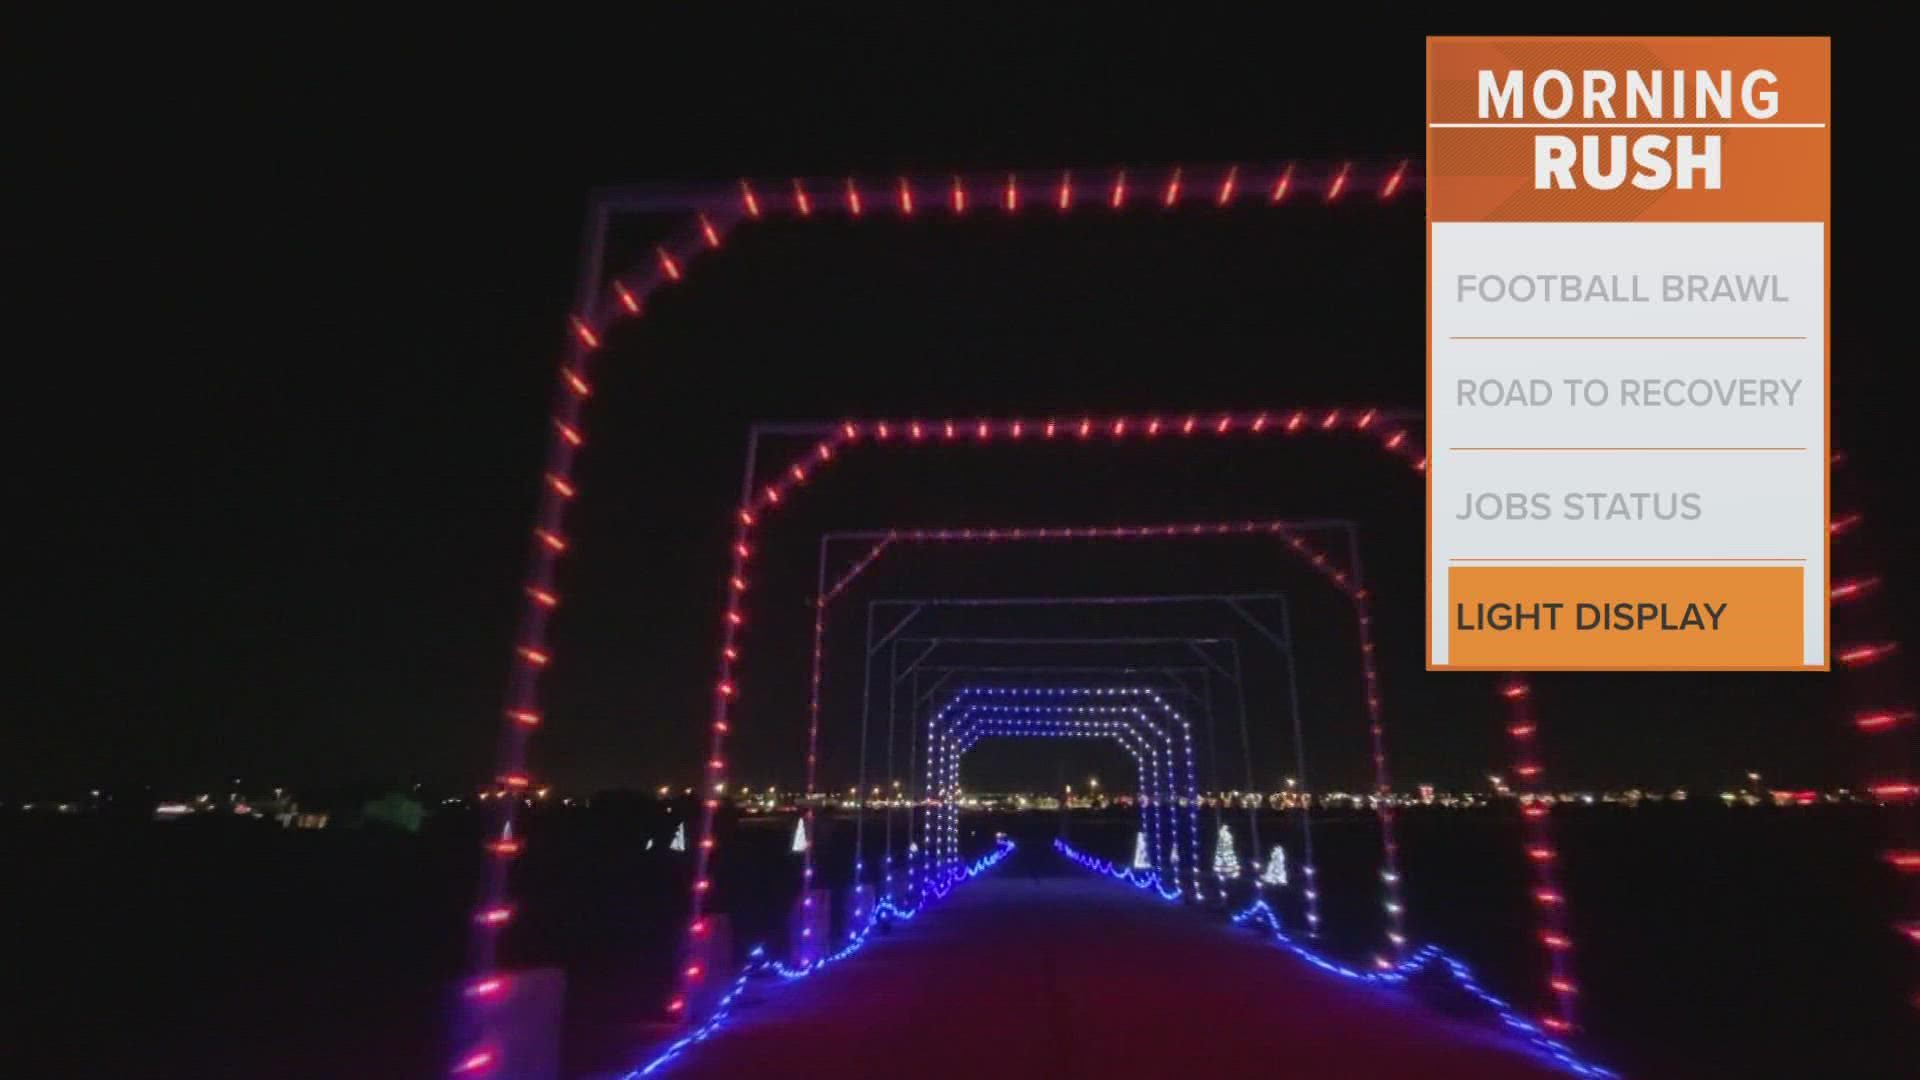 "Gift of Lights" will return to the Texas Motor Speedway from Thanksgiving Day to New Year's Day.